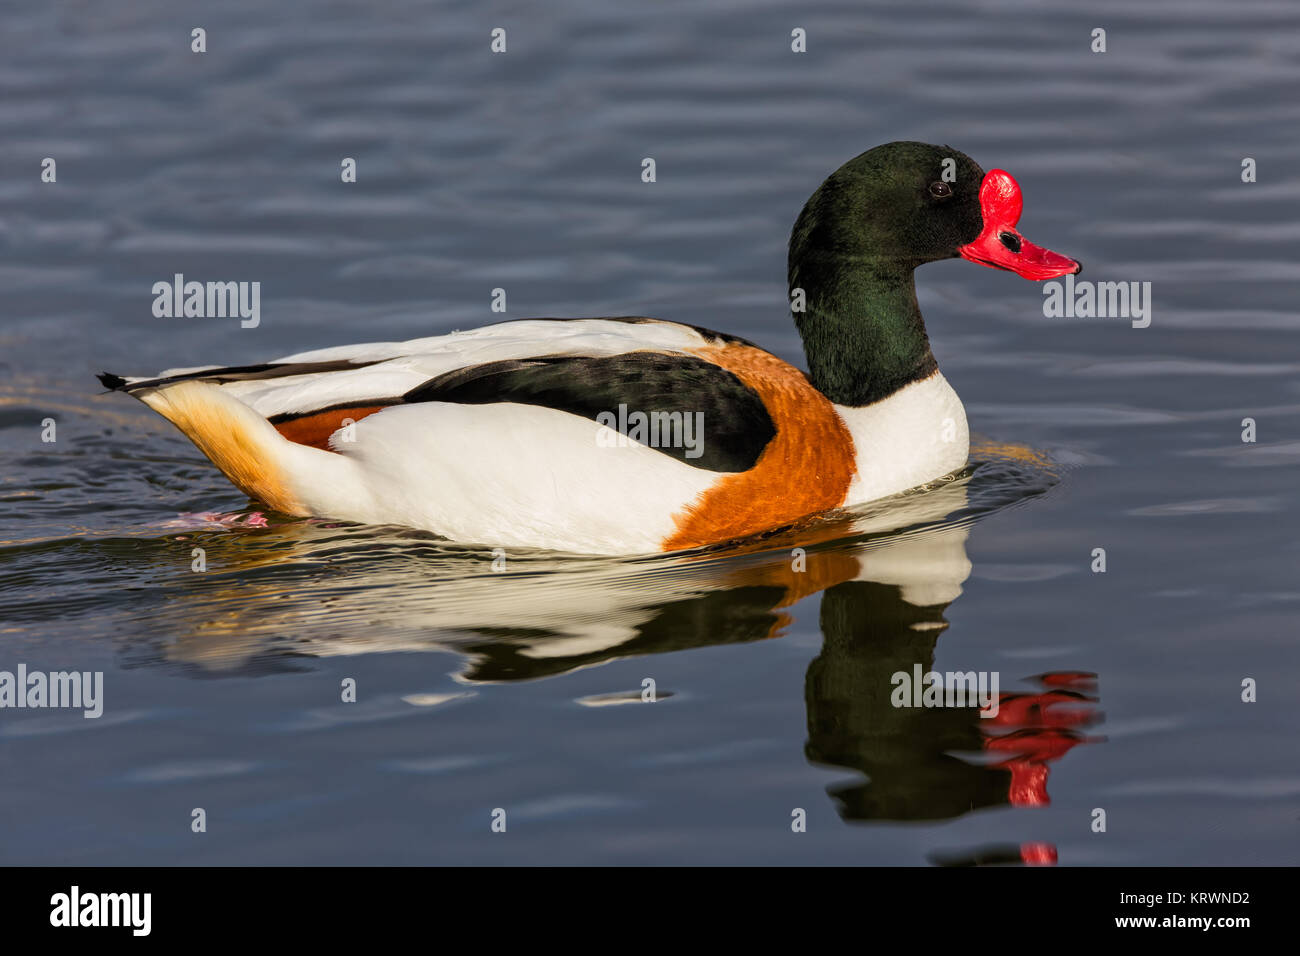 The shelducks, genus Tadorna, are a group of large birds in the Tadorninae subfamily of the Anatidae, the biological family that includes the ducks an Stock Photo